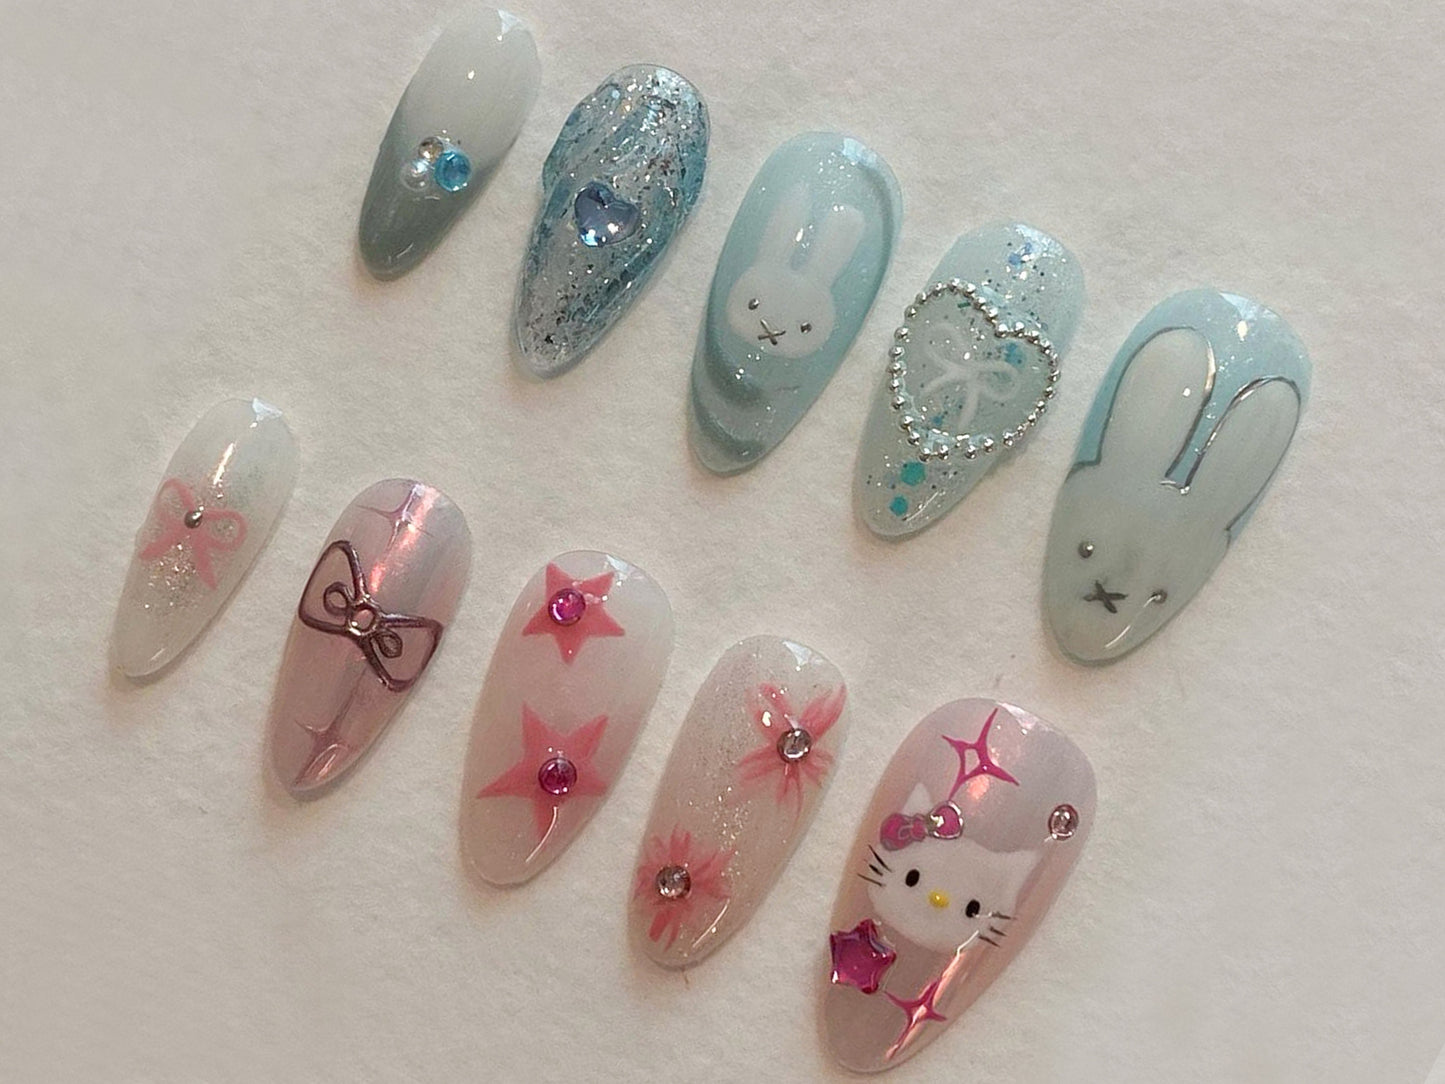 Cute Press On Nails : Pretty Blue and Pink Nails With 3D Patterns | Unique Rabbit and Kitty Decoration Product | Kawaii Nails | JT298